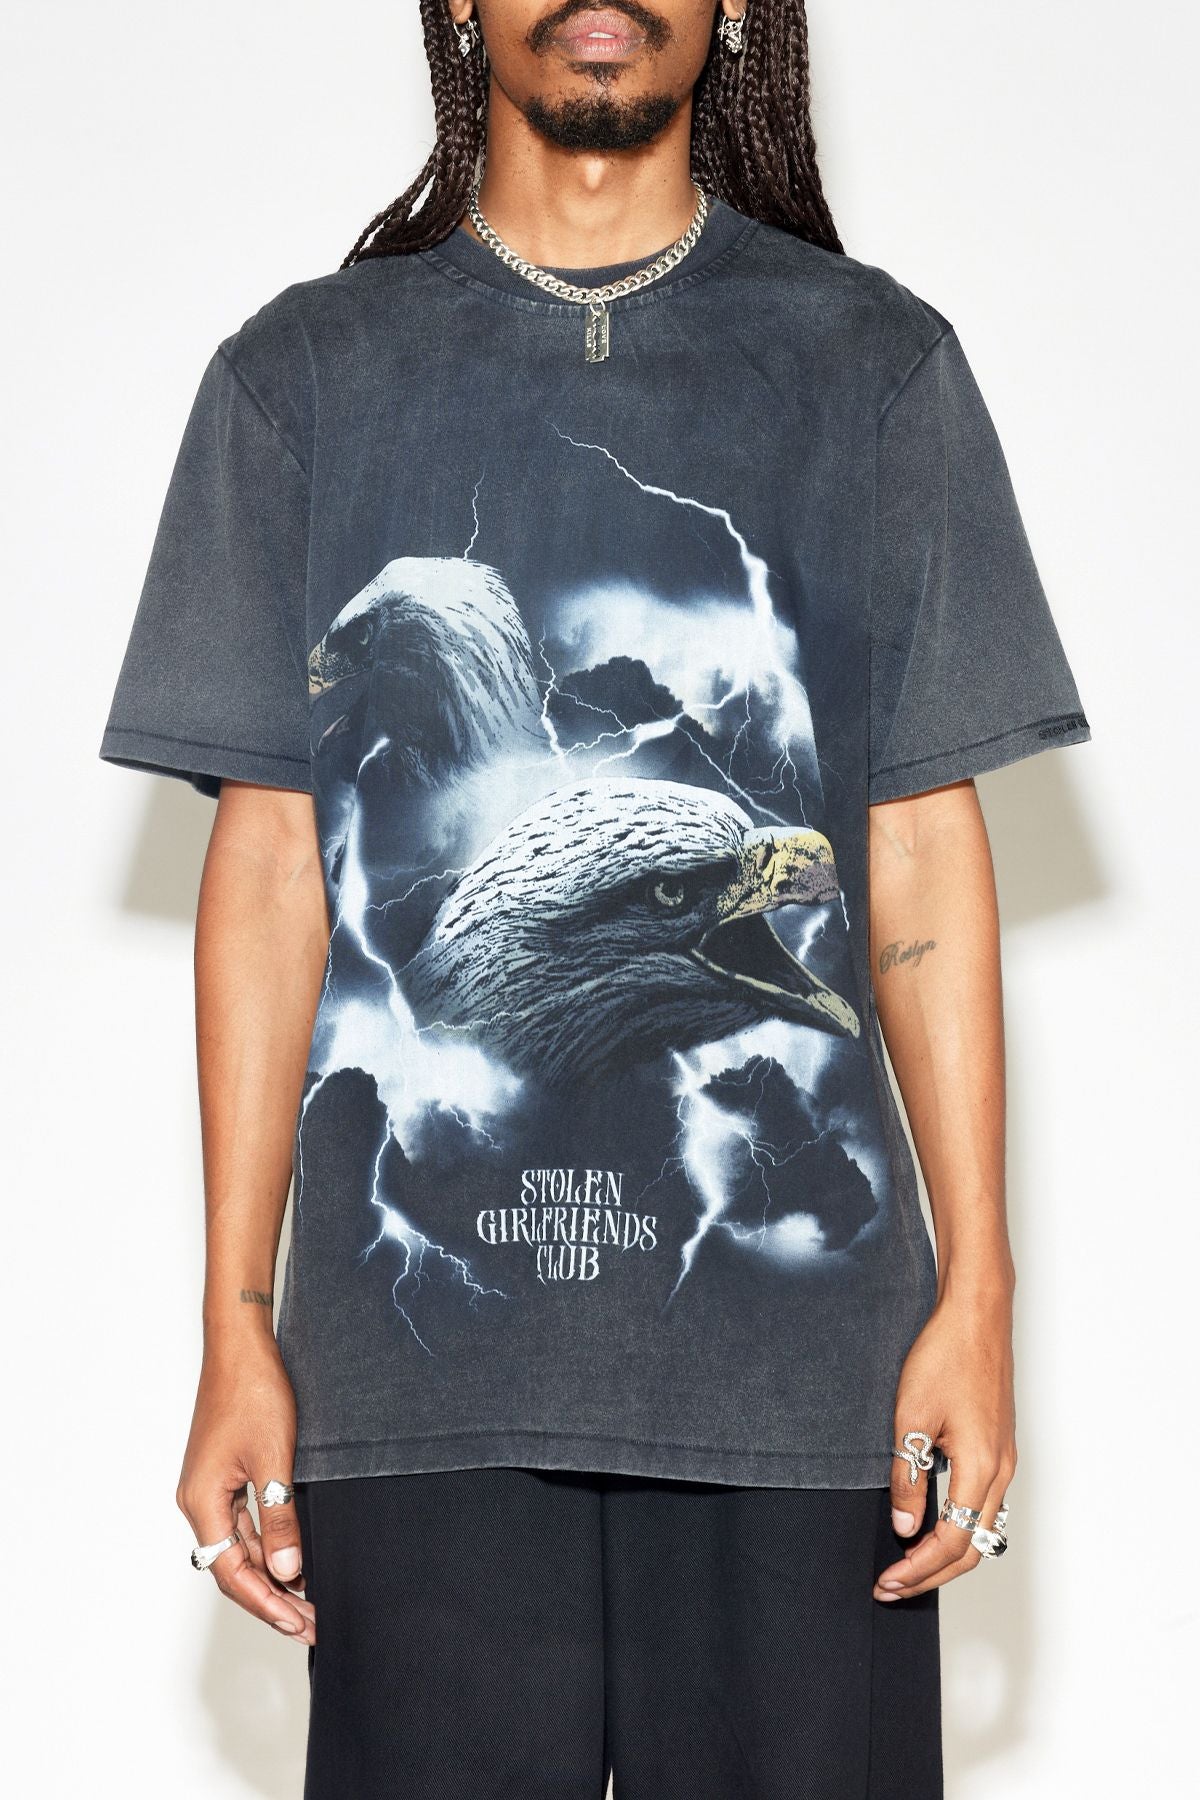 STOLEN GIRLFRIENDS CLUB // Eagle Dreams Tee AGED CHARCOAL